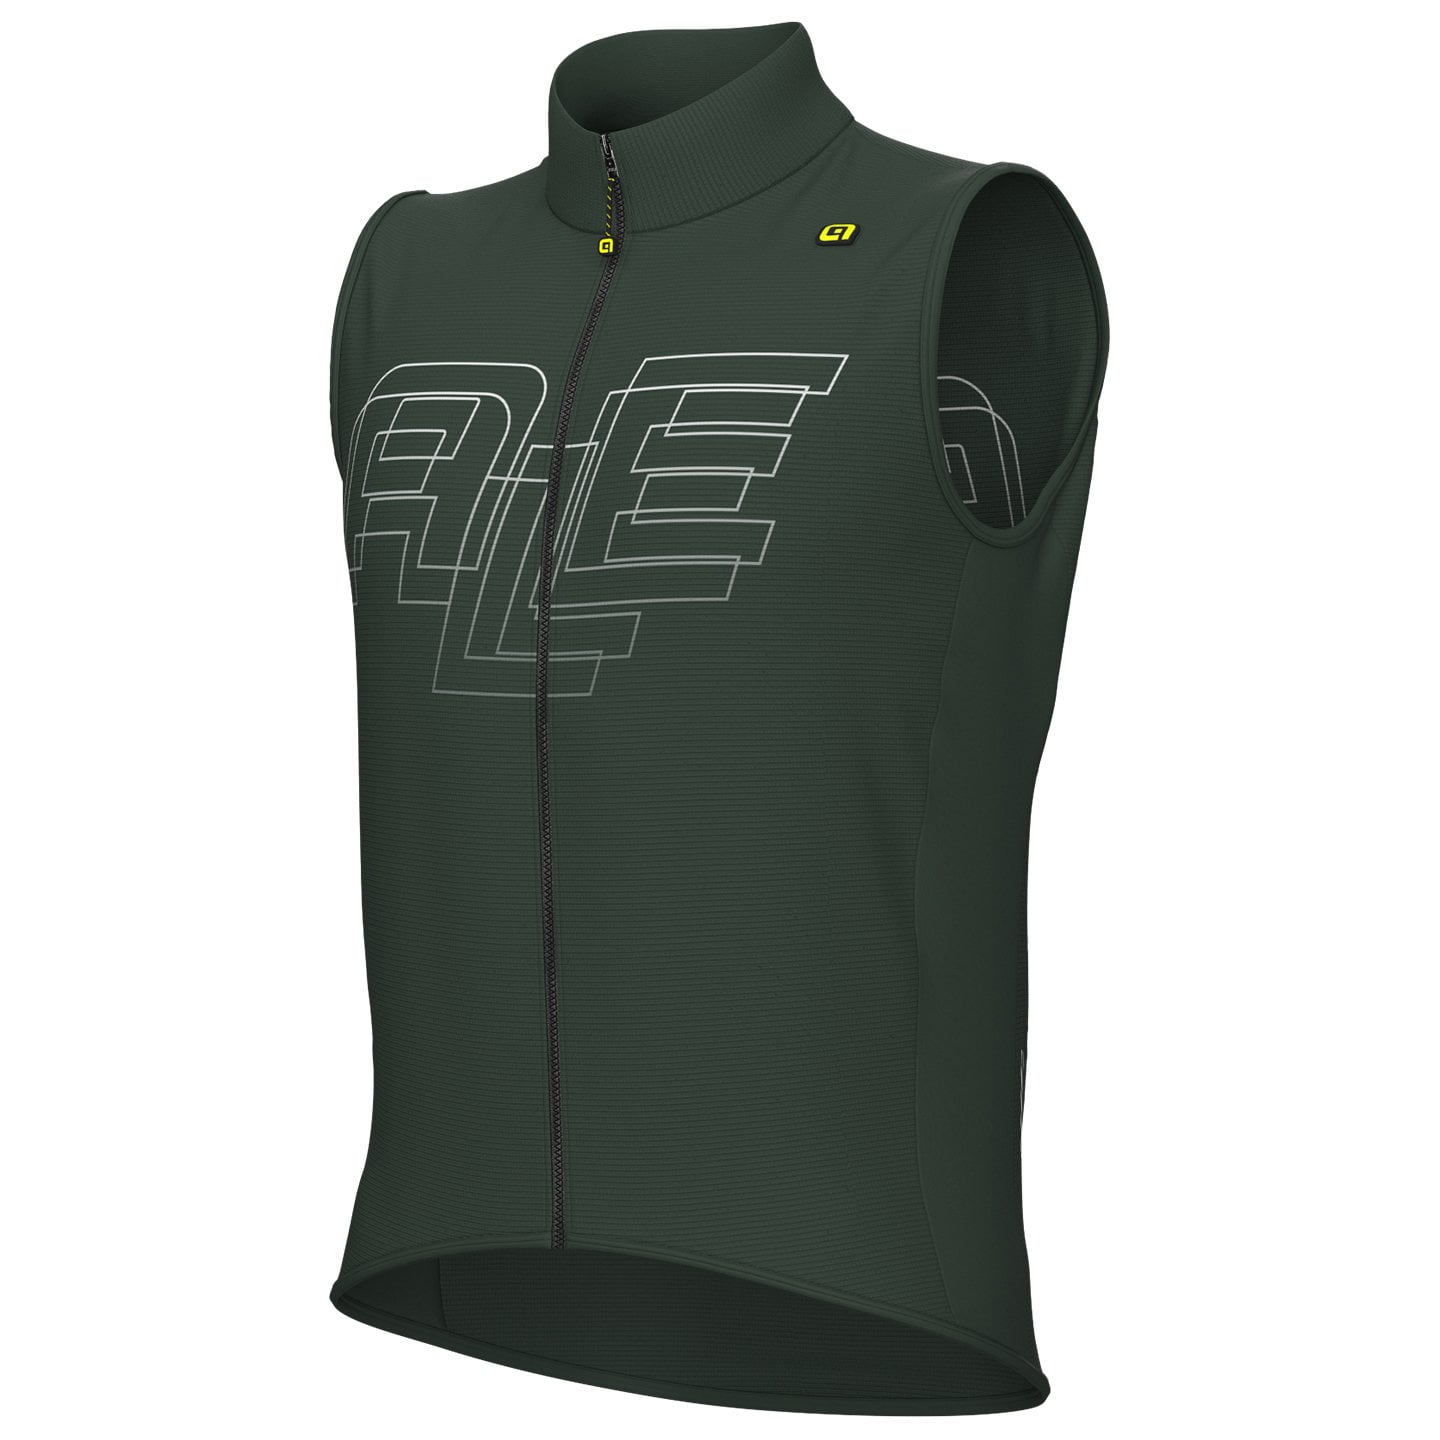 ALE Wind Vests Sauvage Wind Vest, for men, size 2XL, Cycling vest, Cycling clothing